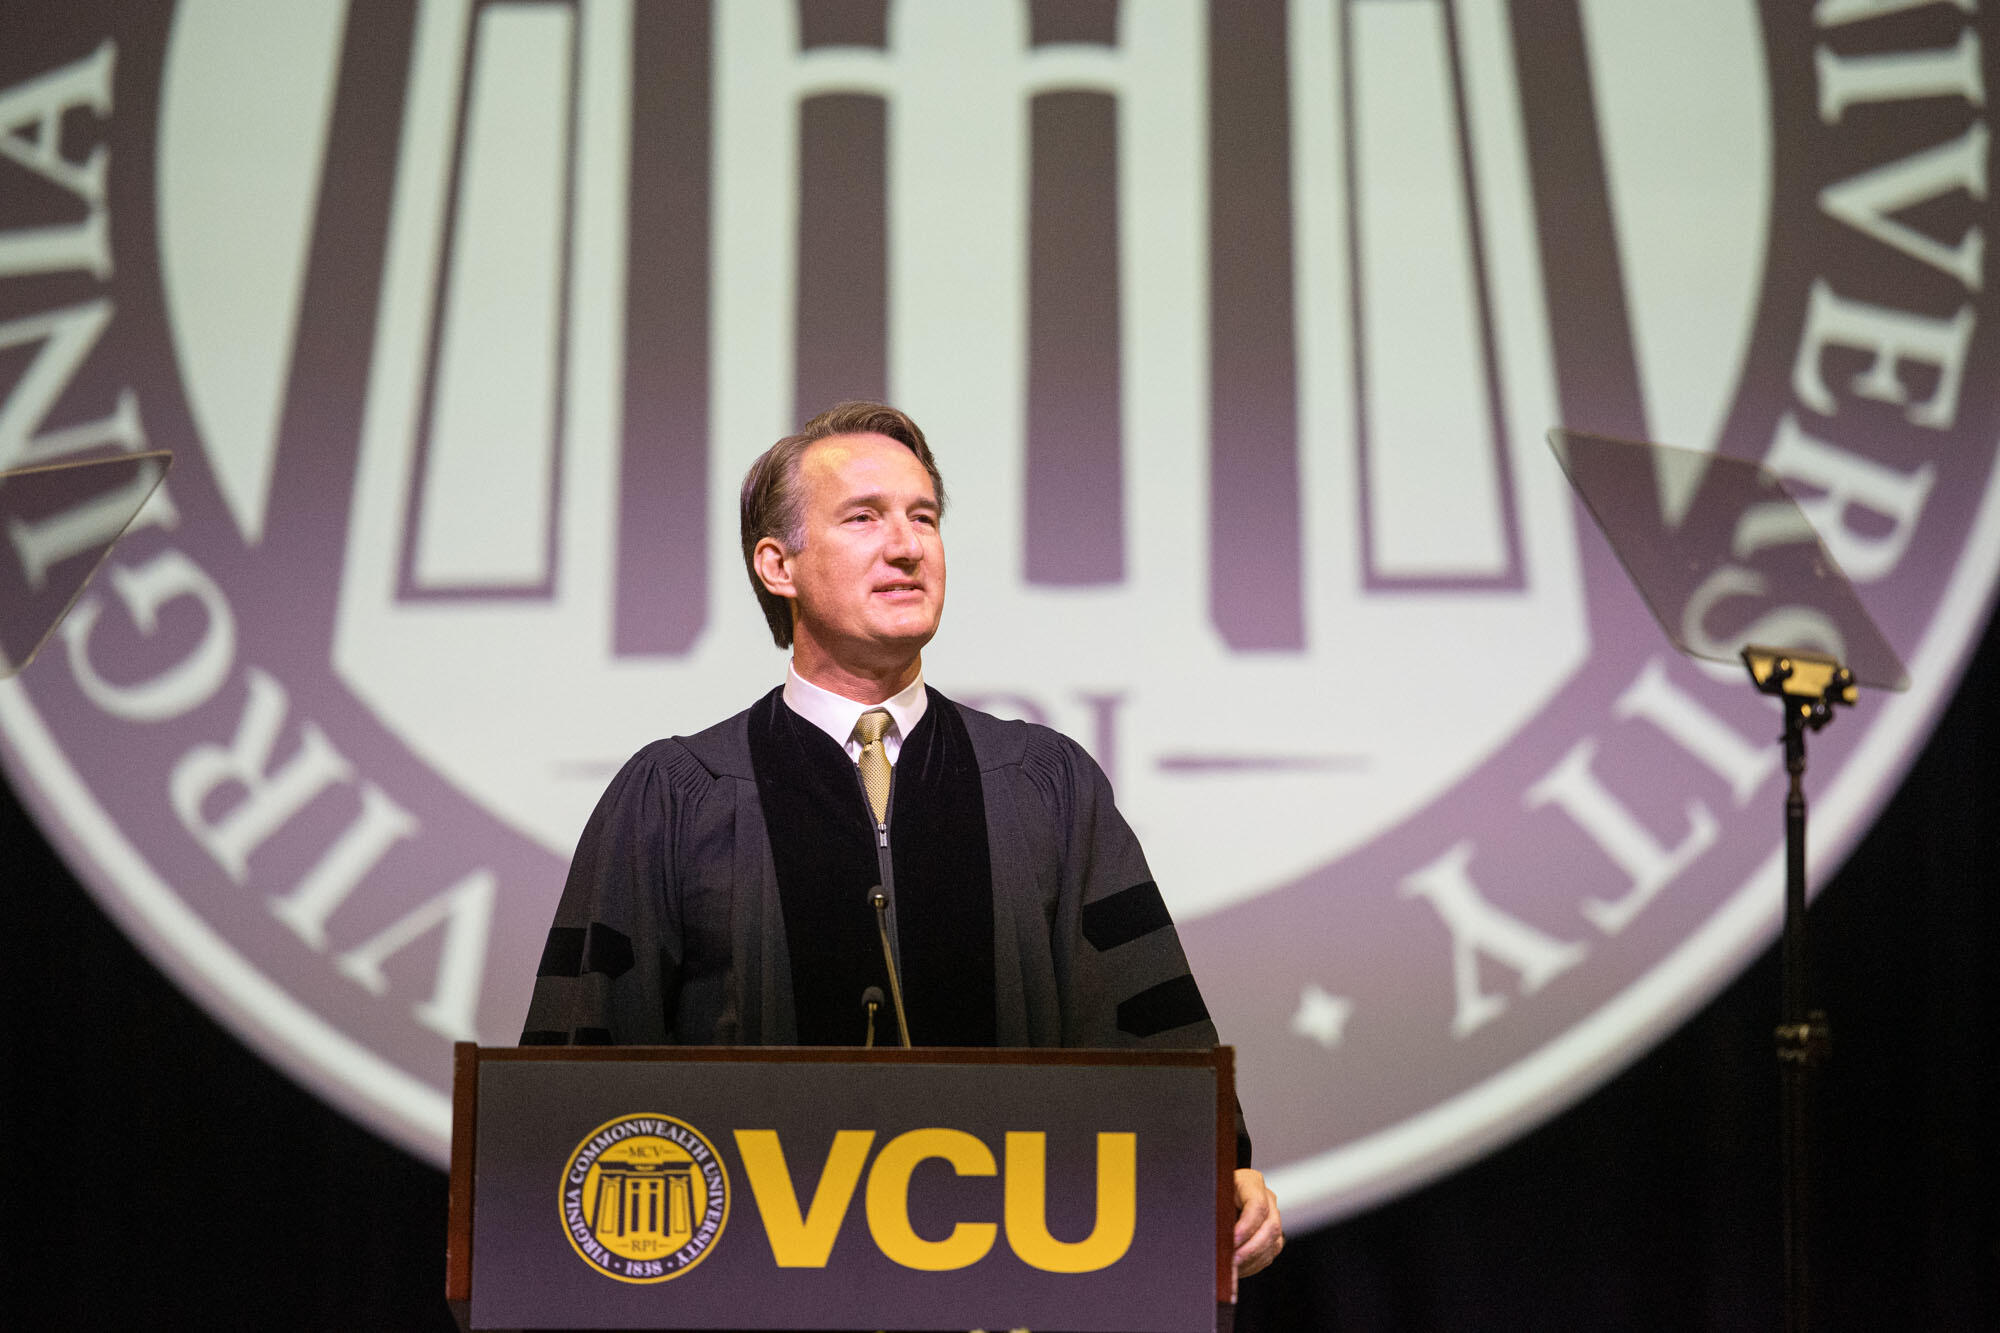 Governor Glenn Youngkin speaking at the podium during VCU's graduation ceremony.